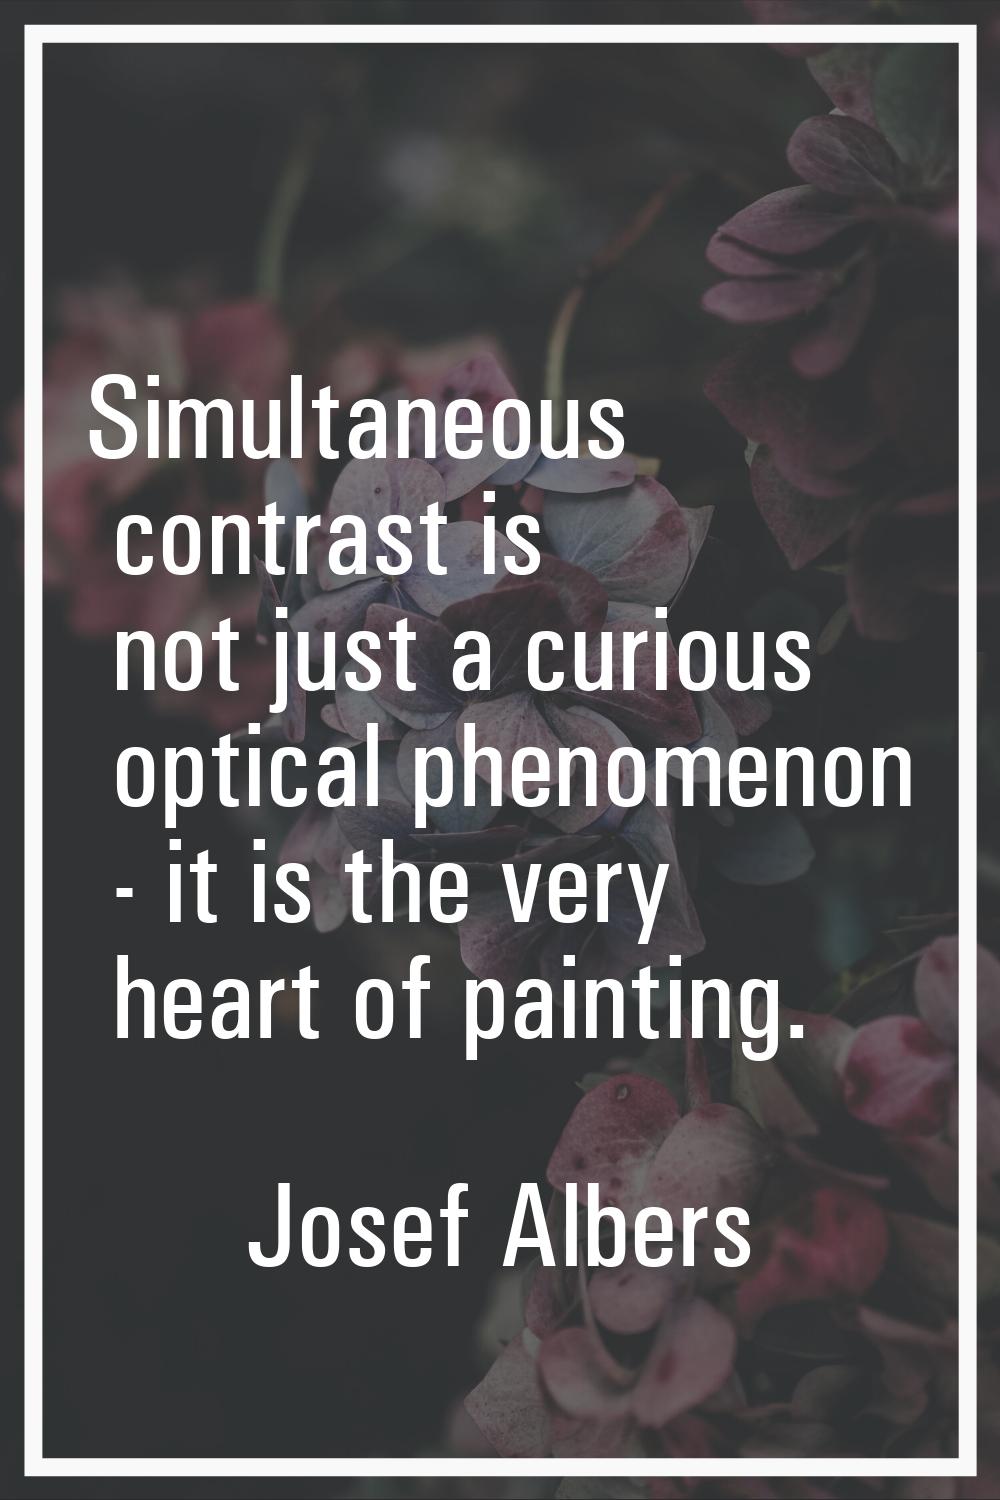 Simultaneous contrast is not just a curious optical phenomenon - it is the very heart of painting.